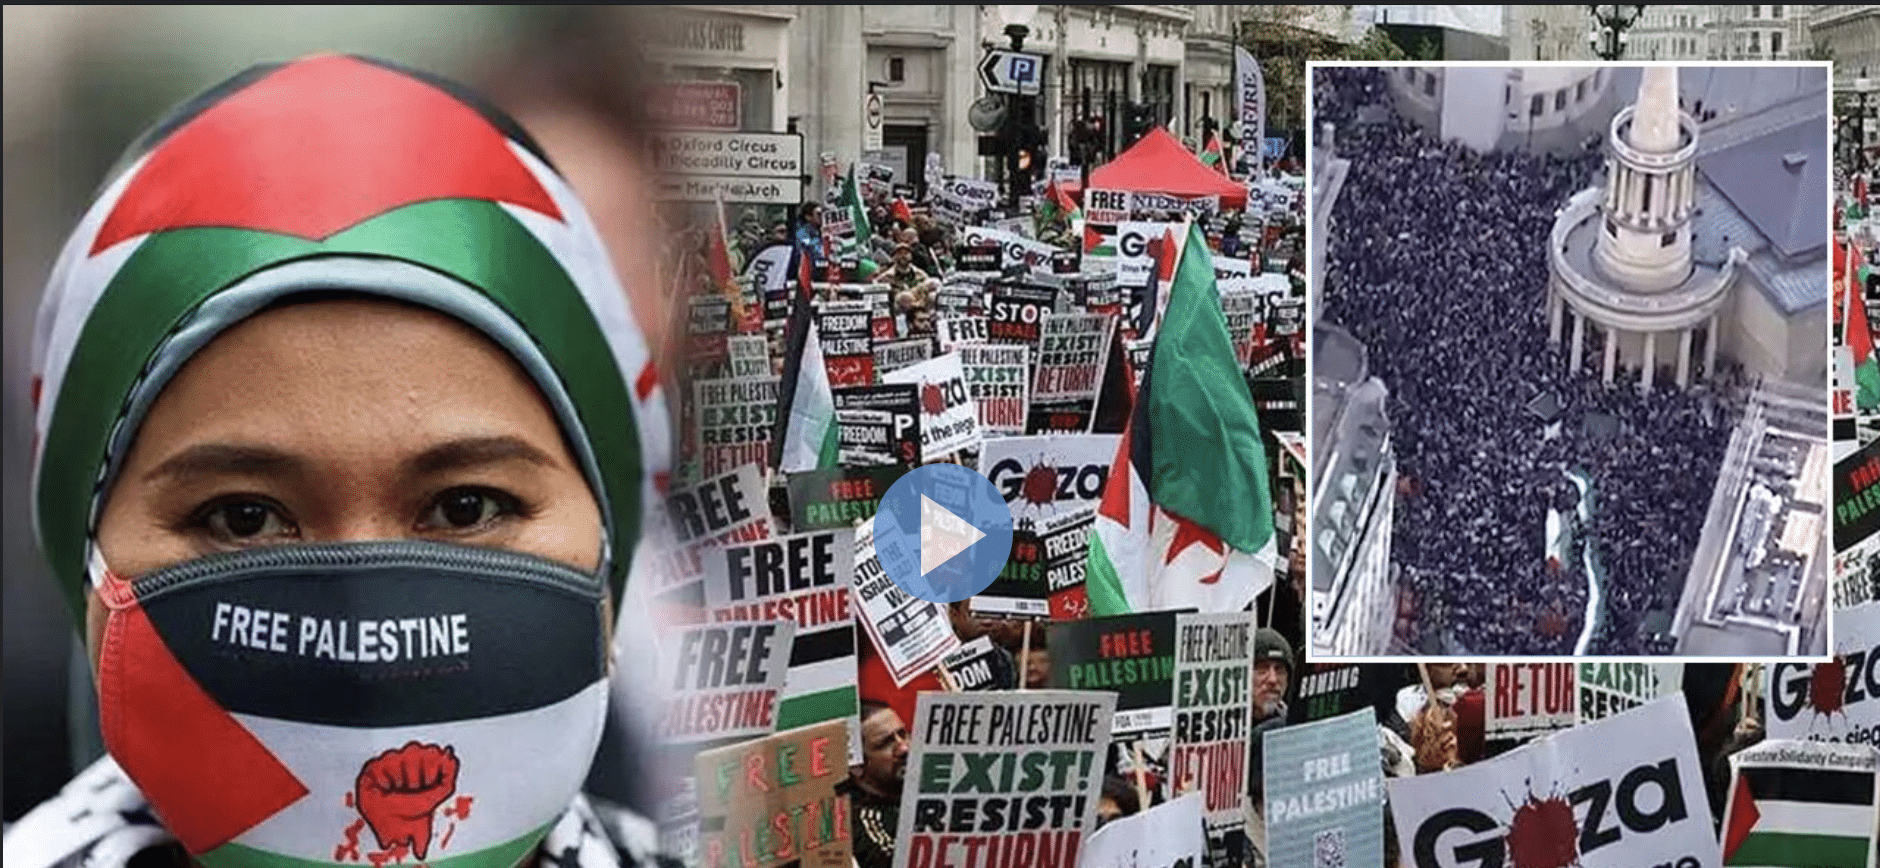 TIPPING POINT: Over 50k Pro-Palestinian protesters take the streets of London